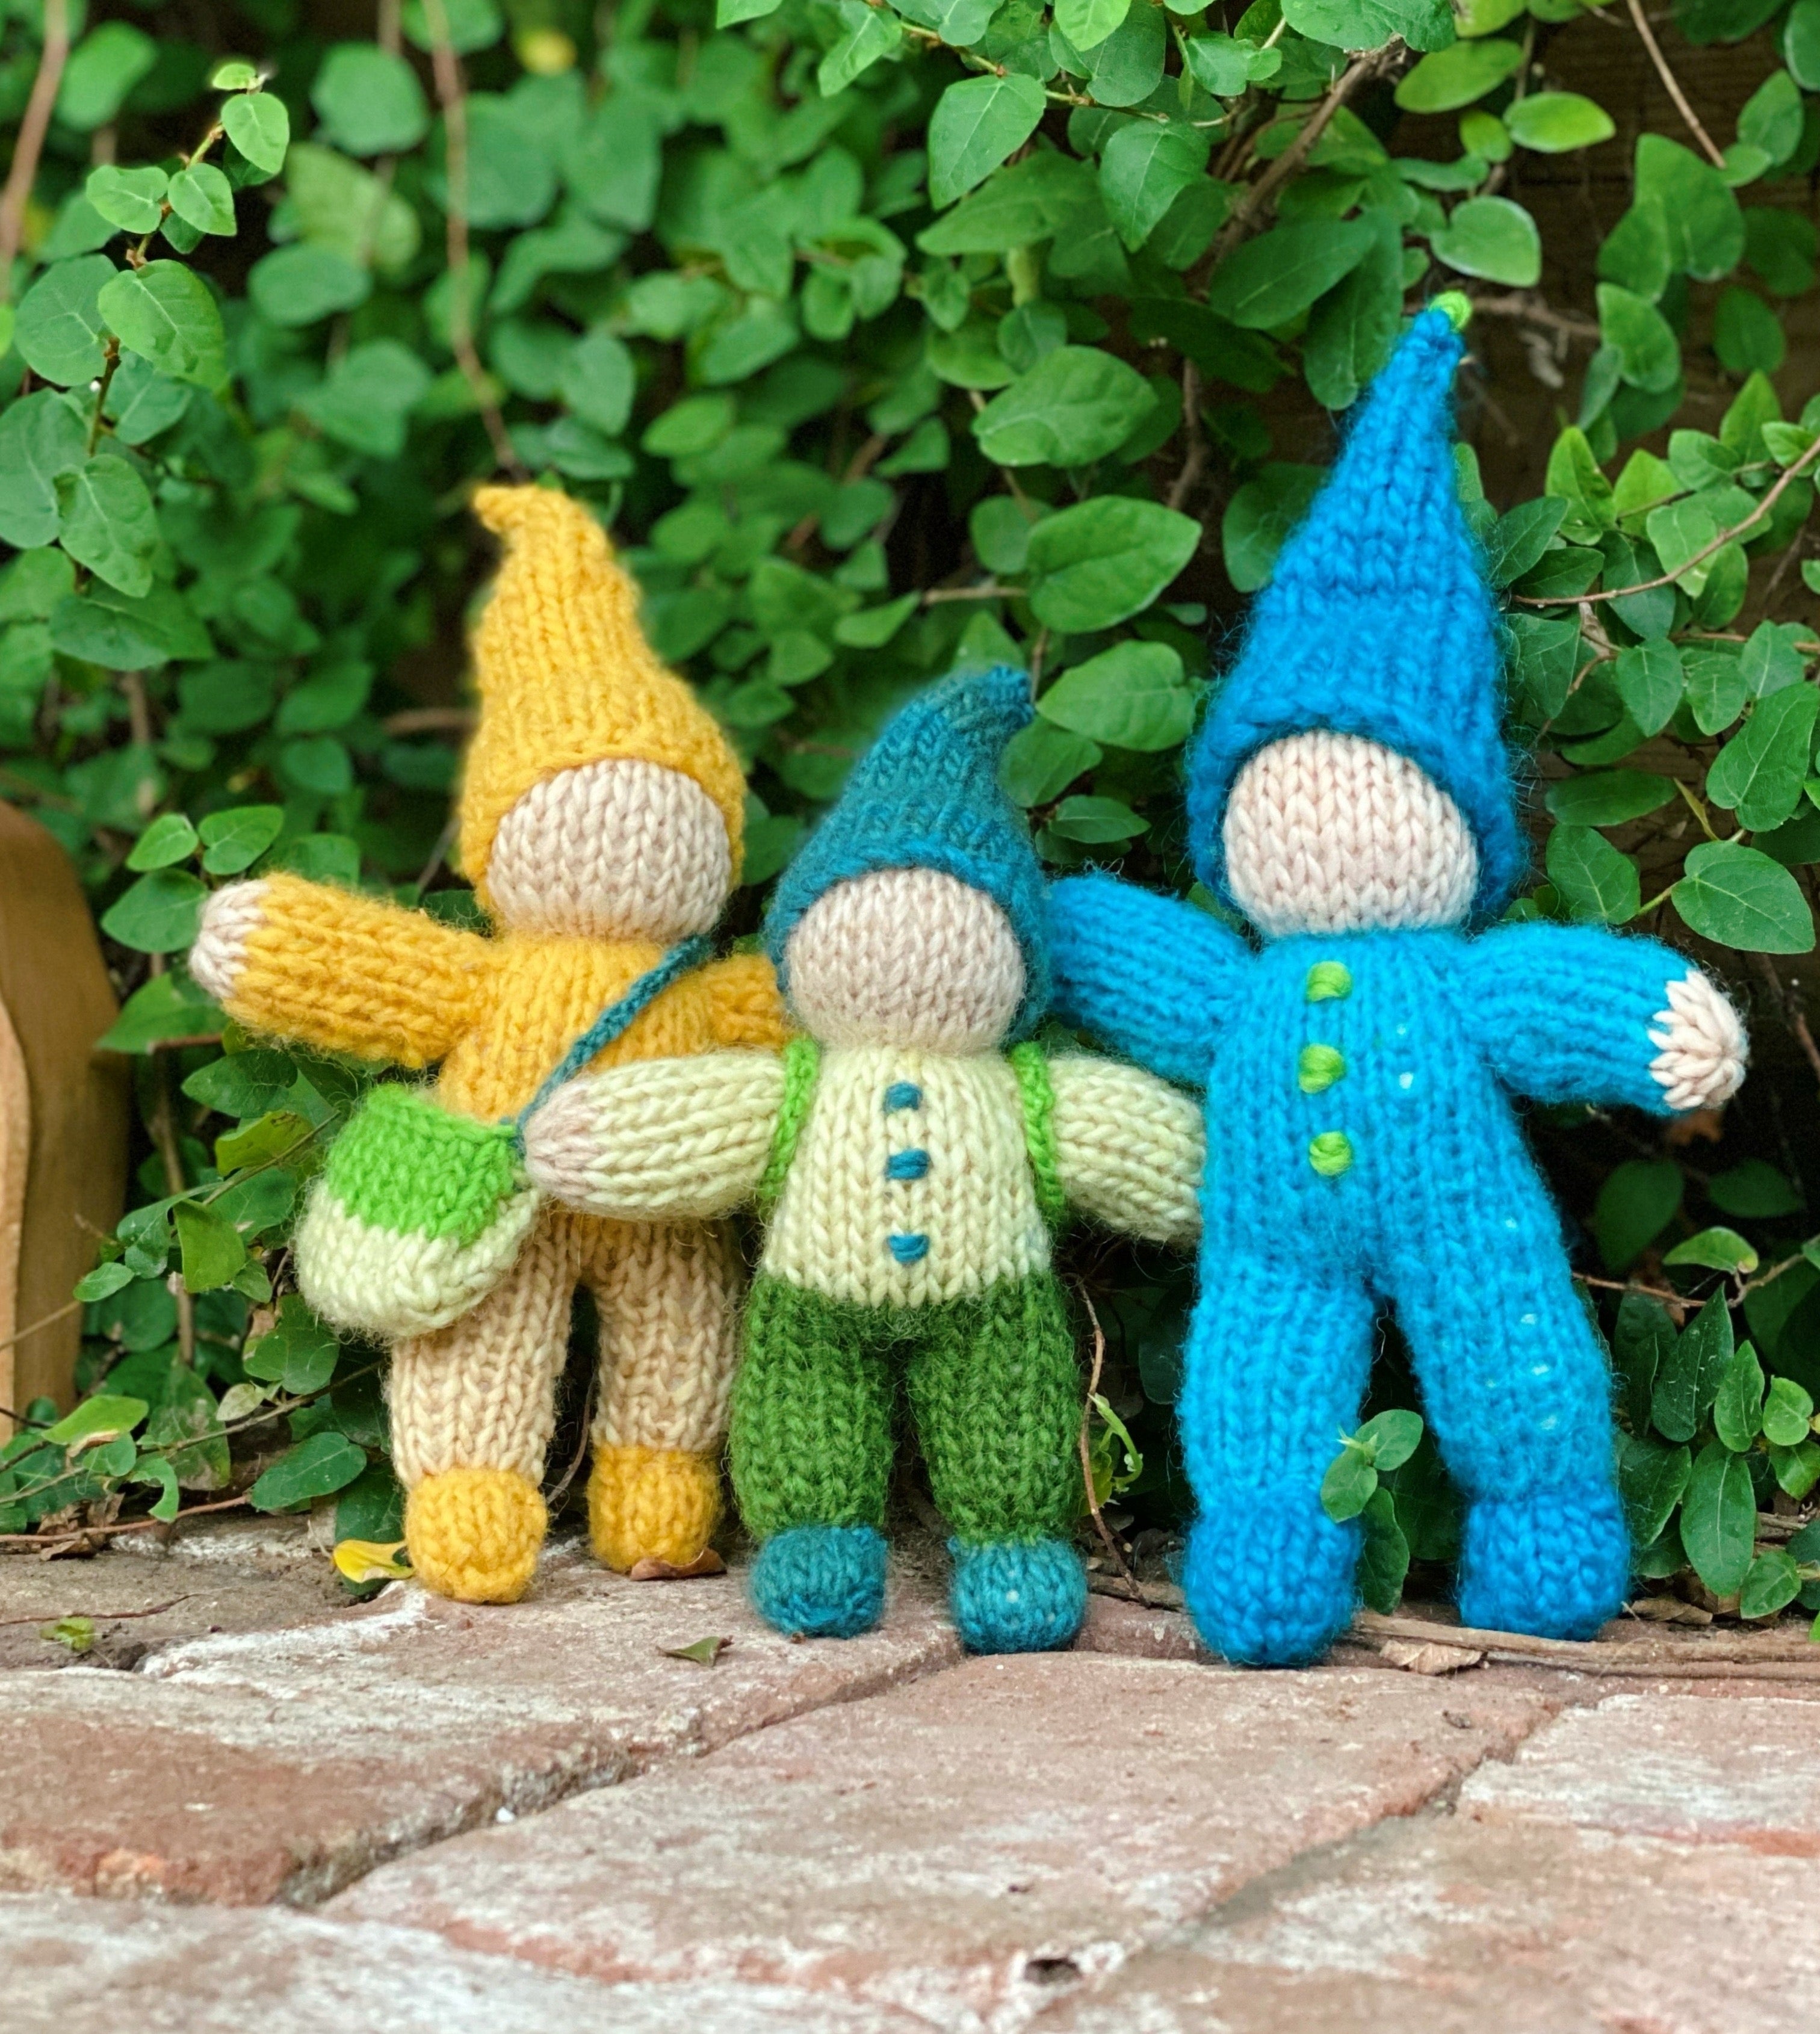 Knit Your Own Gnome Doll - Waldorf Handwork Tutorial